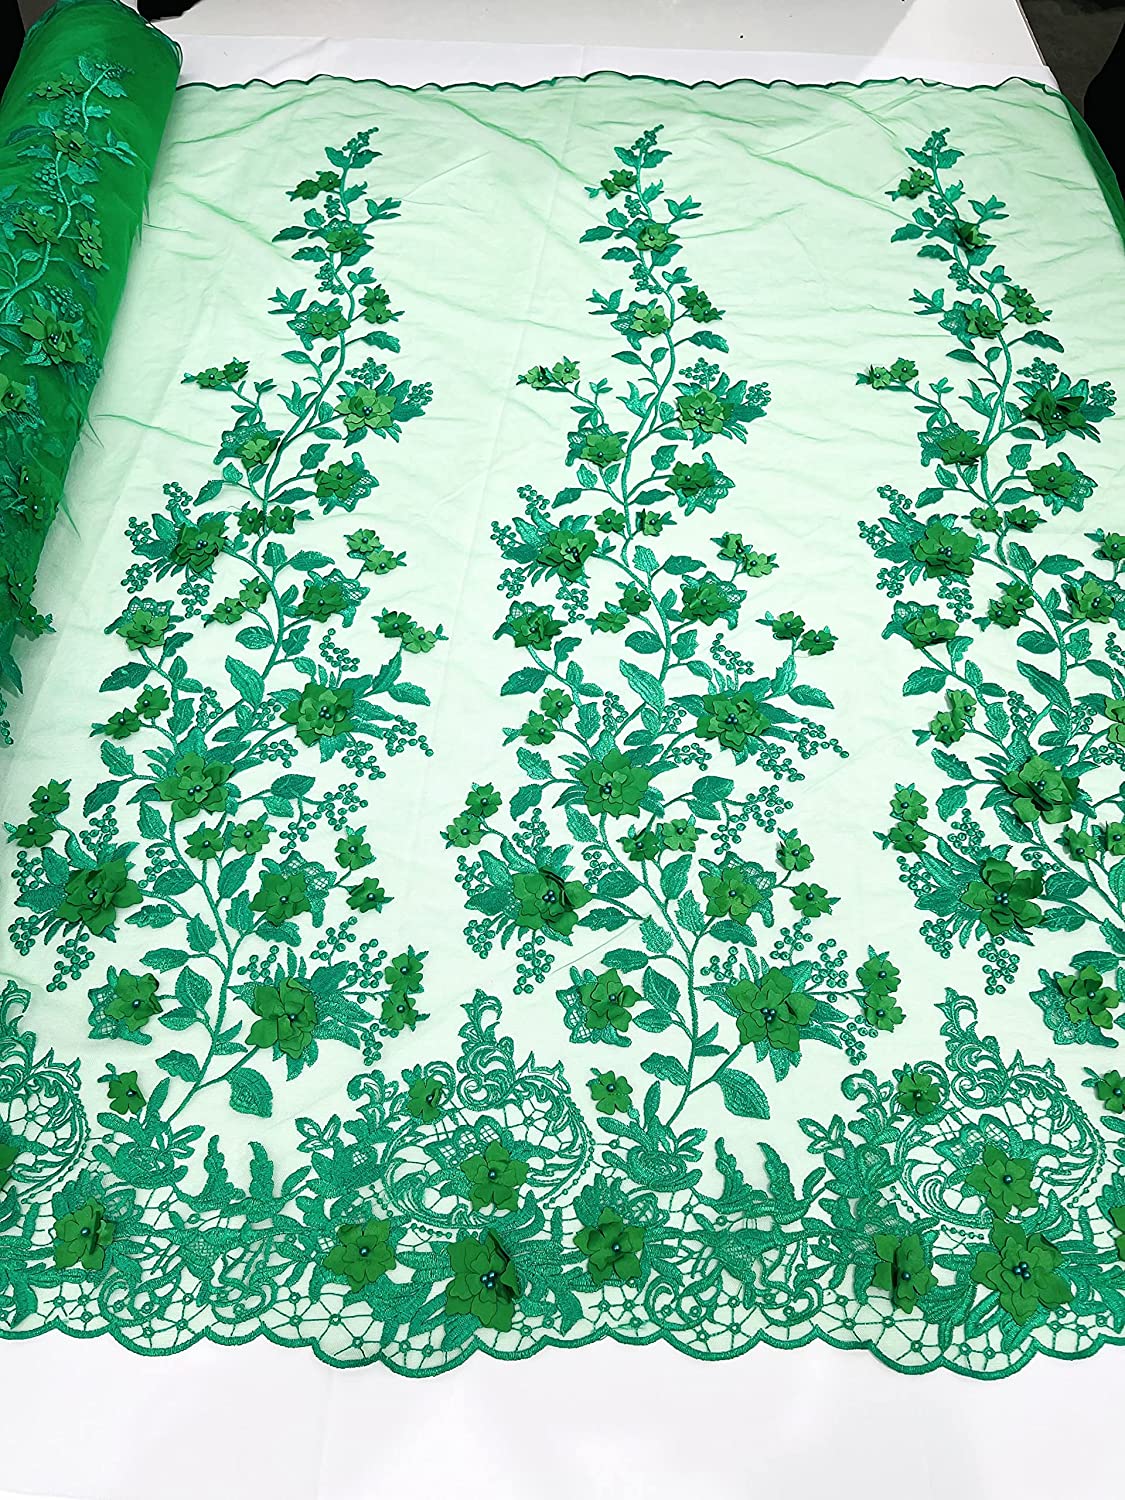 Emily 3-D Floral Design Embroider with Pearls On A Mesh Lace Fabric (1 Yard, Kelly Green)